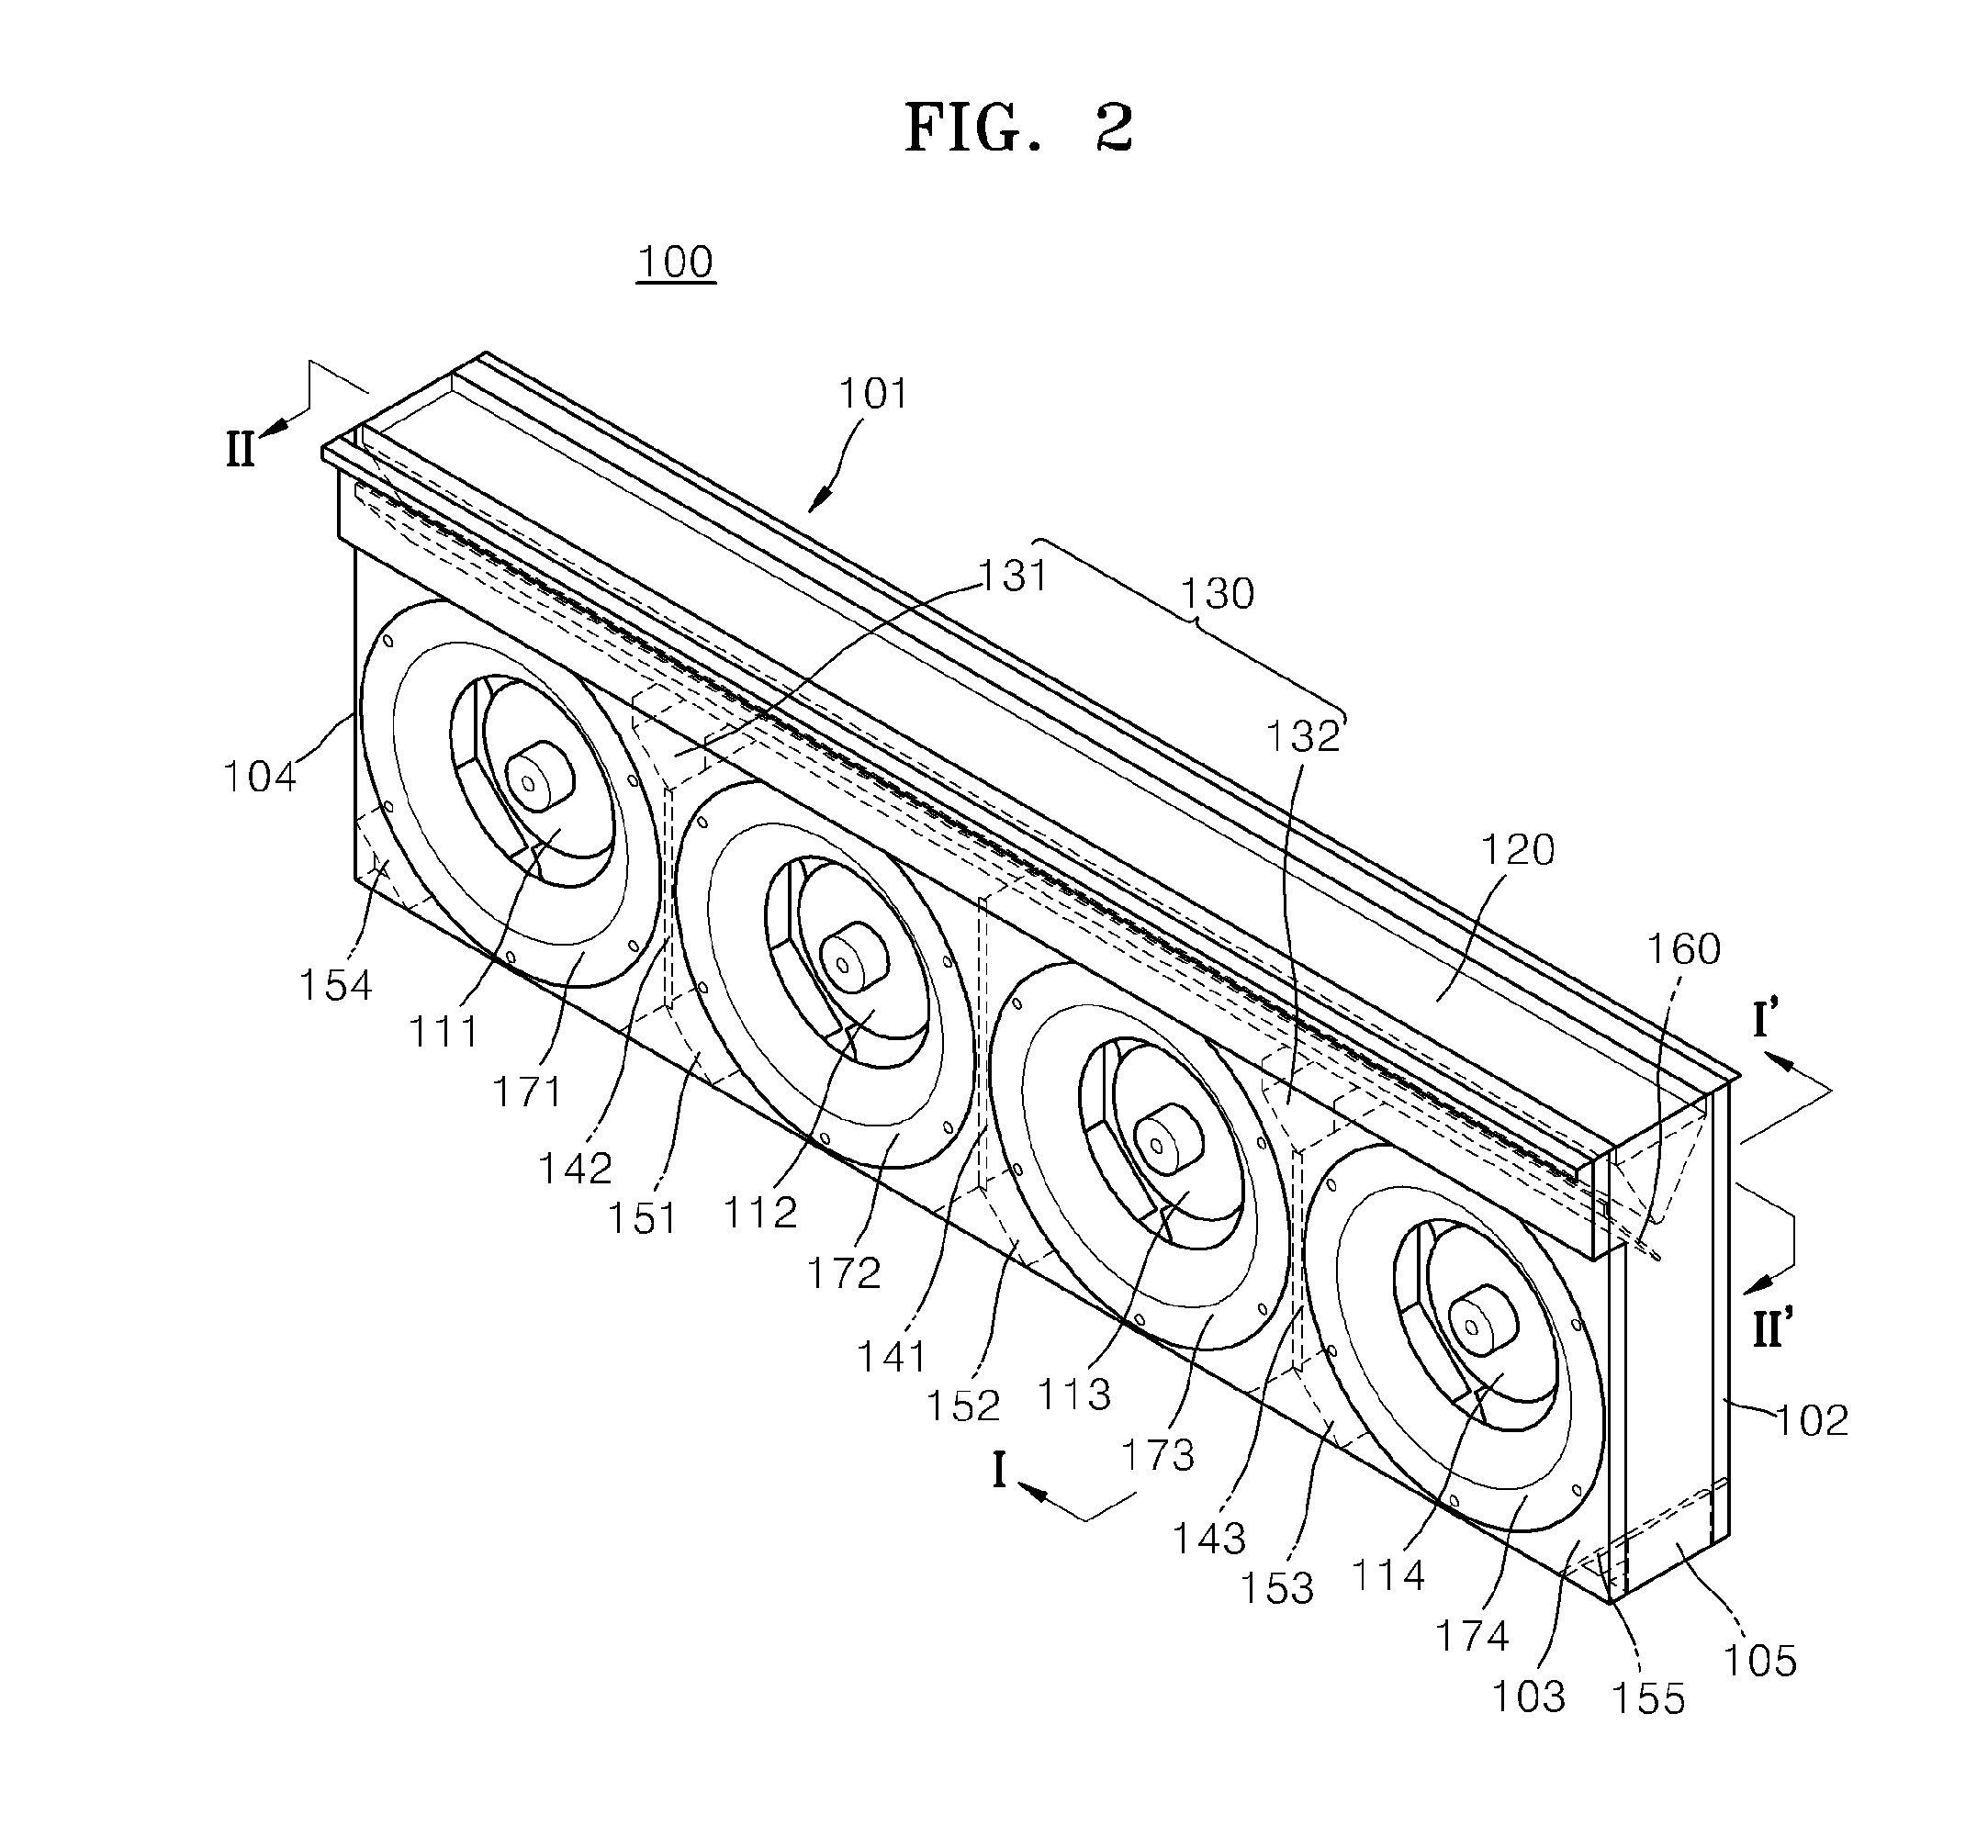 Cooler and display device having the same